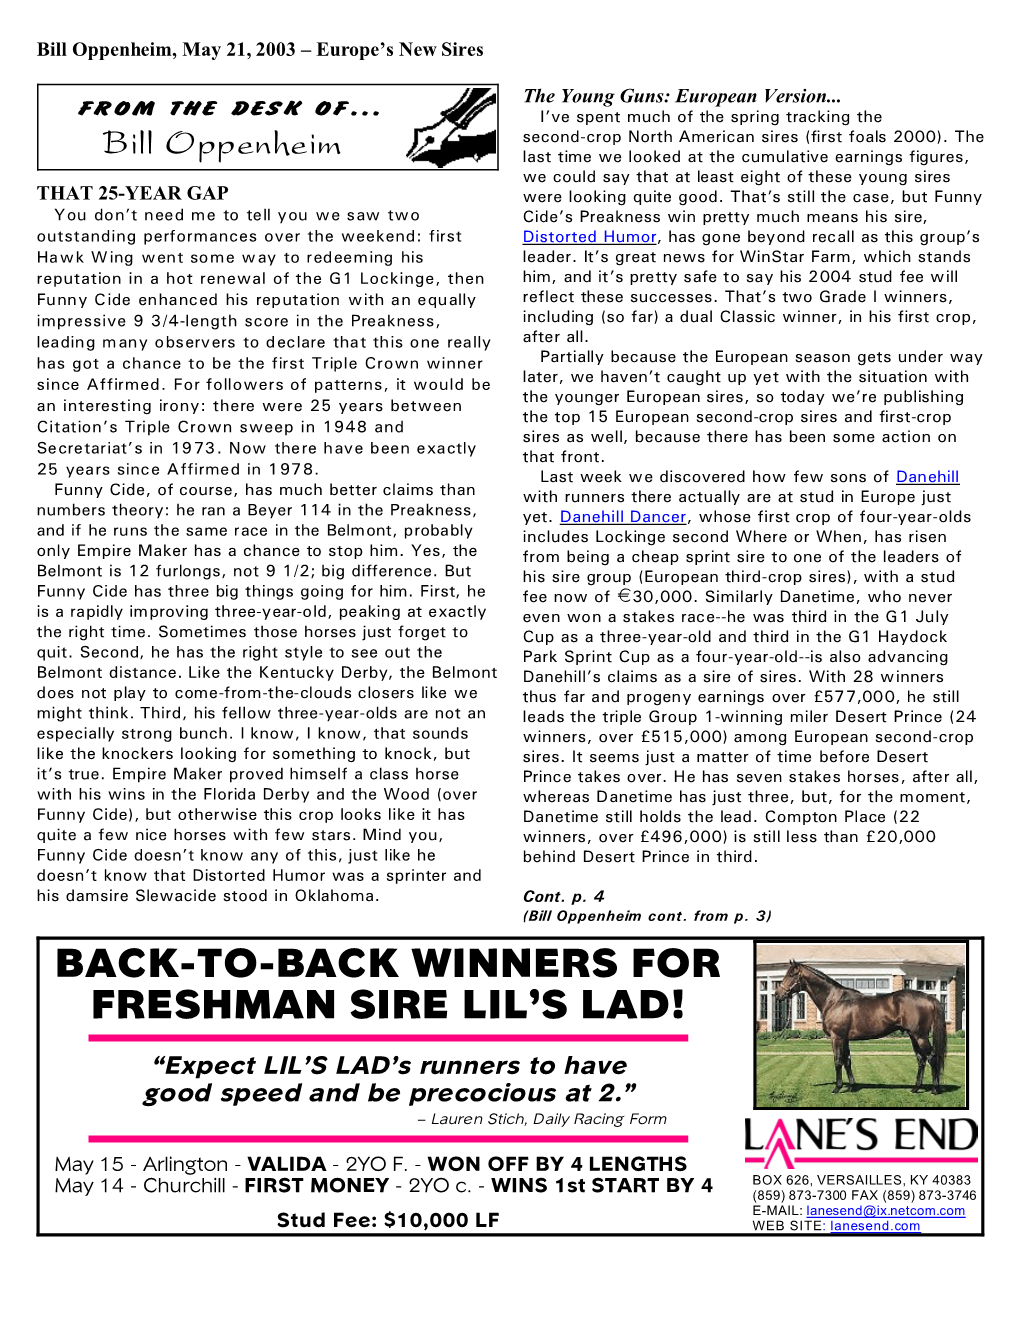 Back-To-Back Winners for Freshman Sire Lil's Lad!